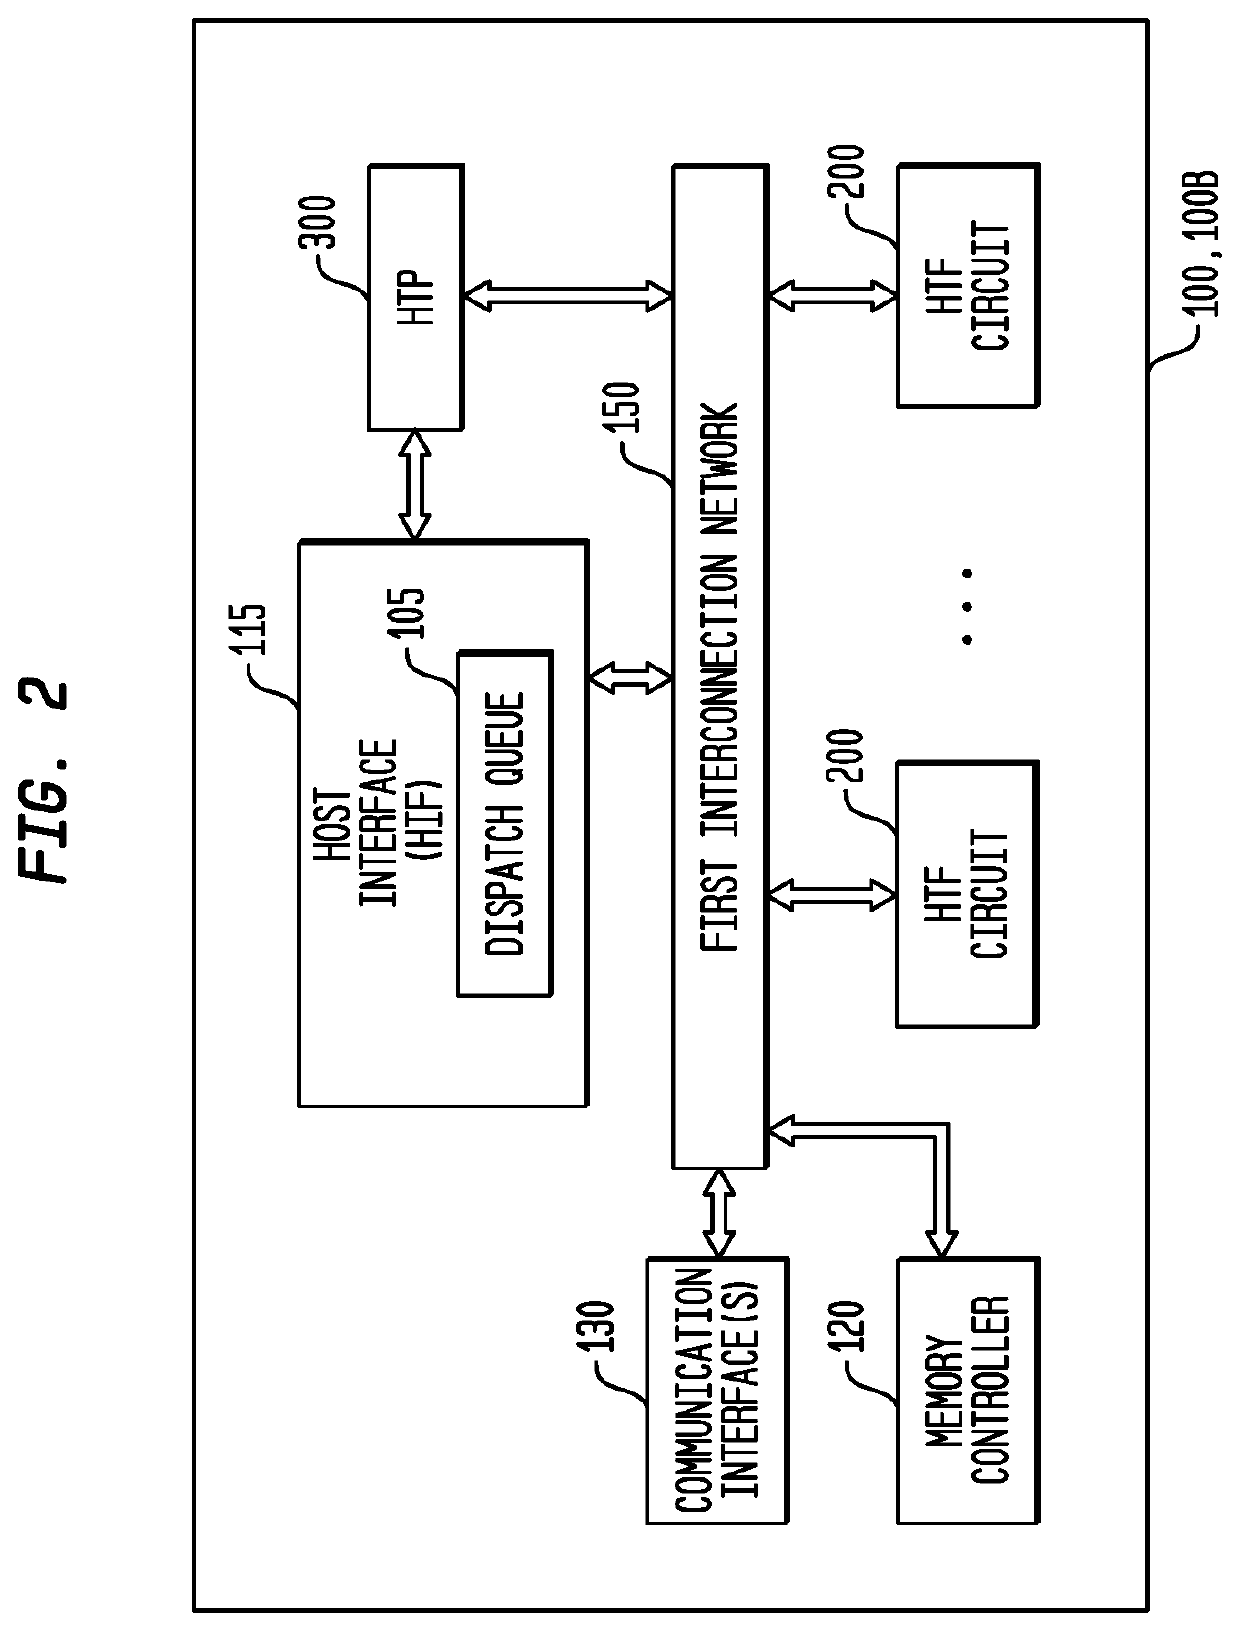 Thread State Monitoring in a System Having a Multi-Threaded, Self-Scheduling Processor